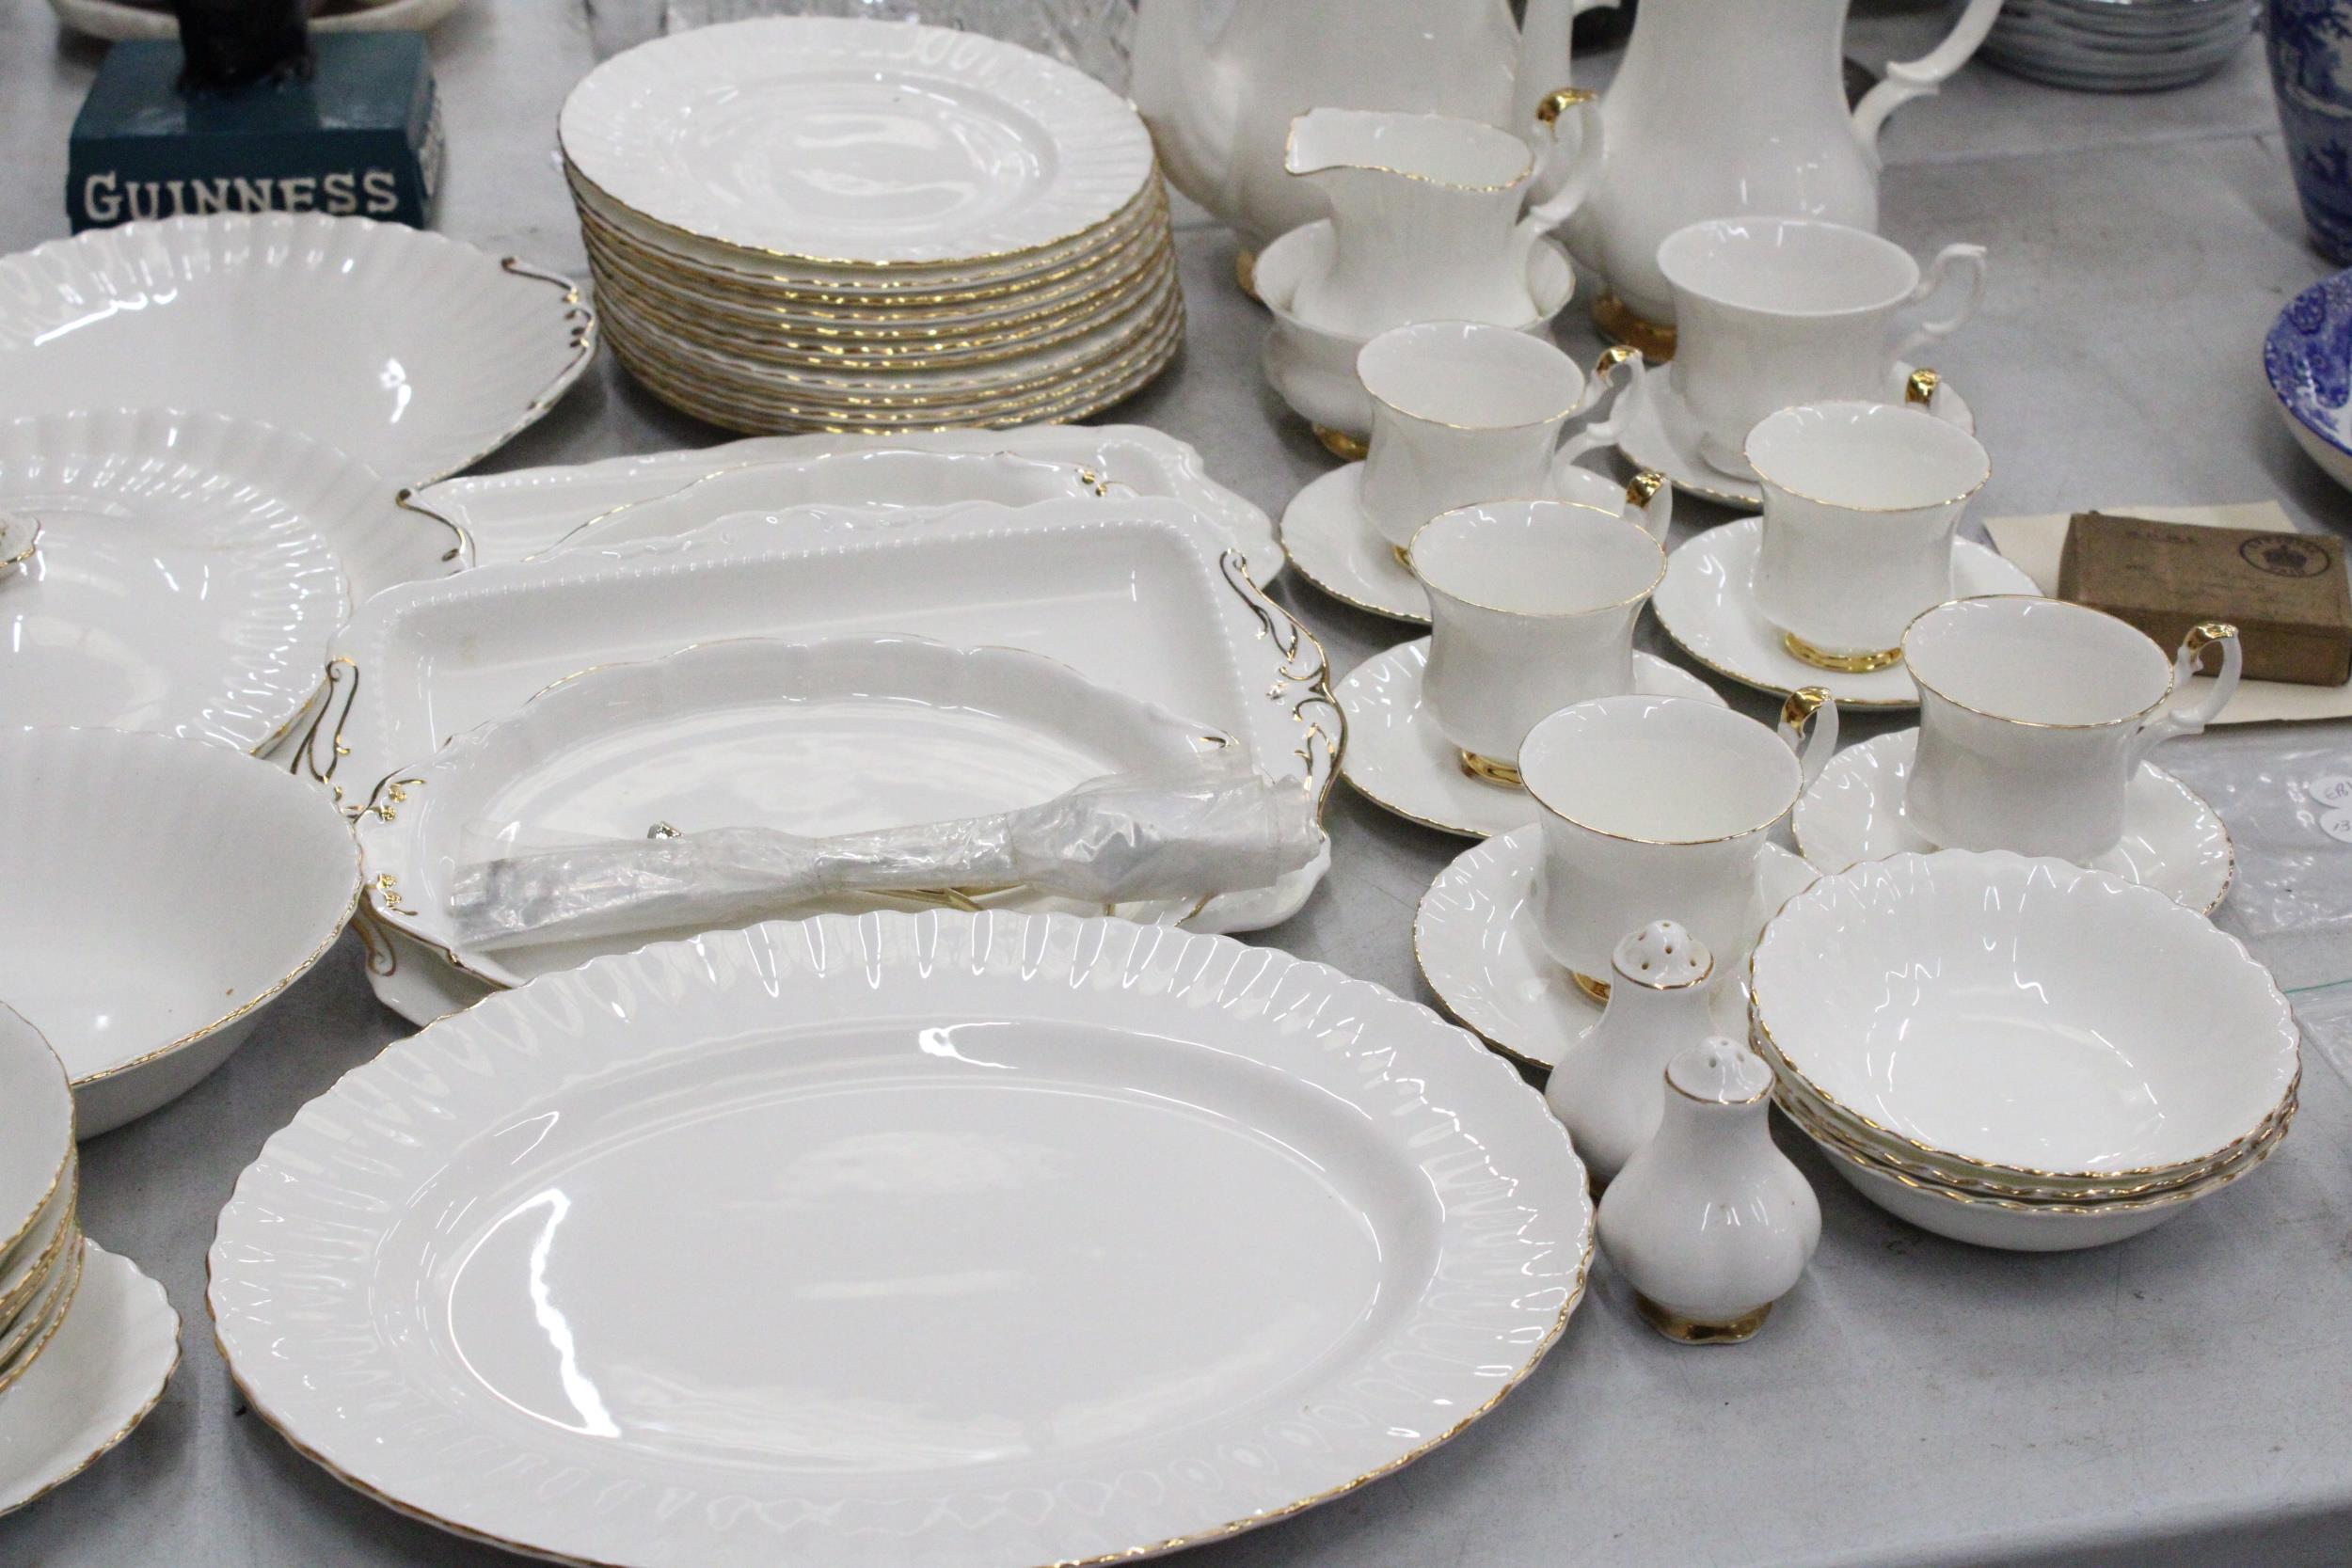 A LARGE ROYAL ALBERT PART DINNER SERVIE "VAL DOR" TO INCLUDE PLATES, CUPS, SAUCERS, TEAPOT, COFFEE - Image 5 of 6